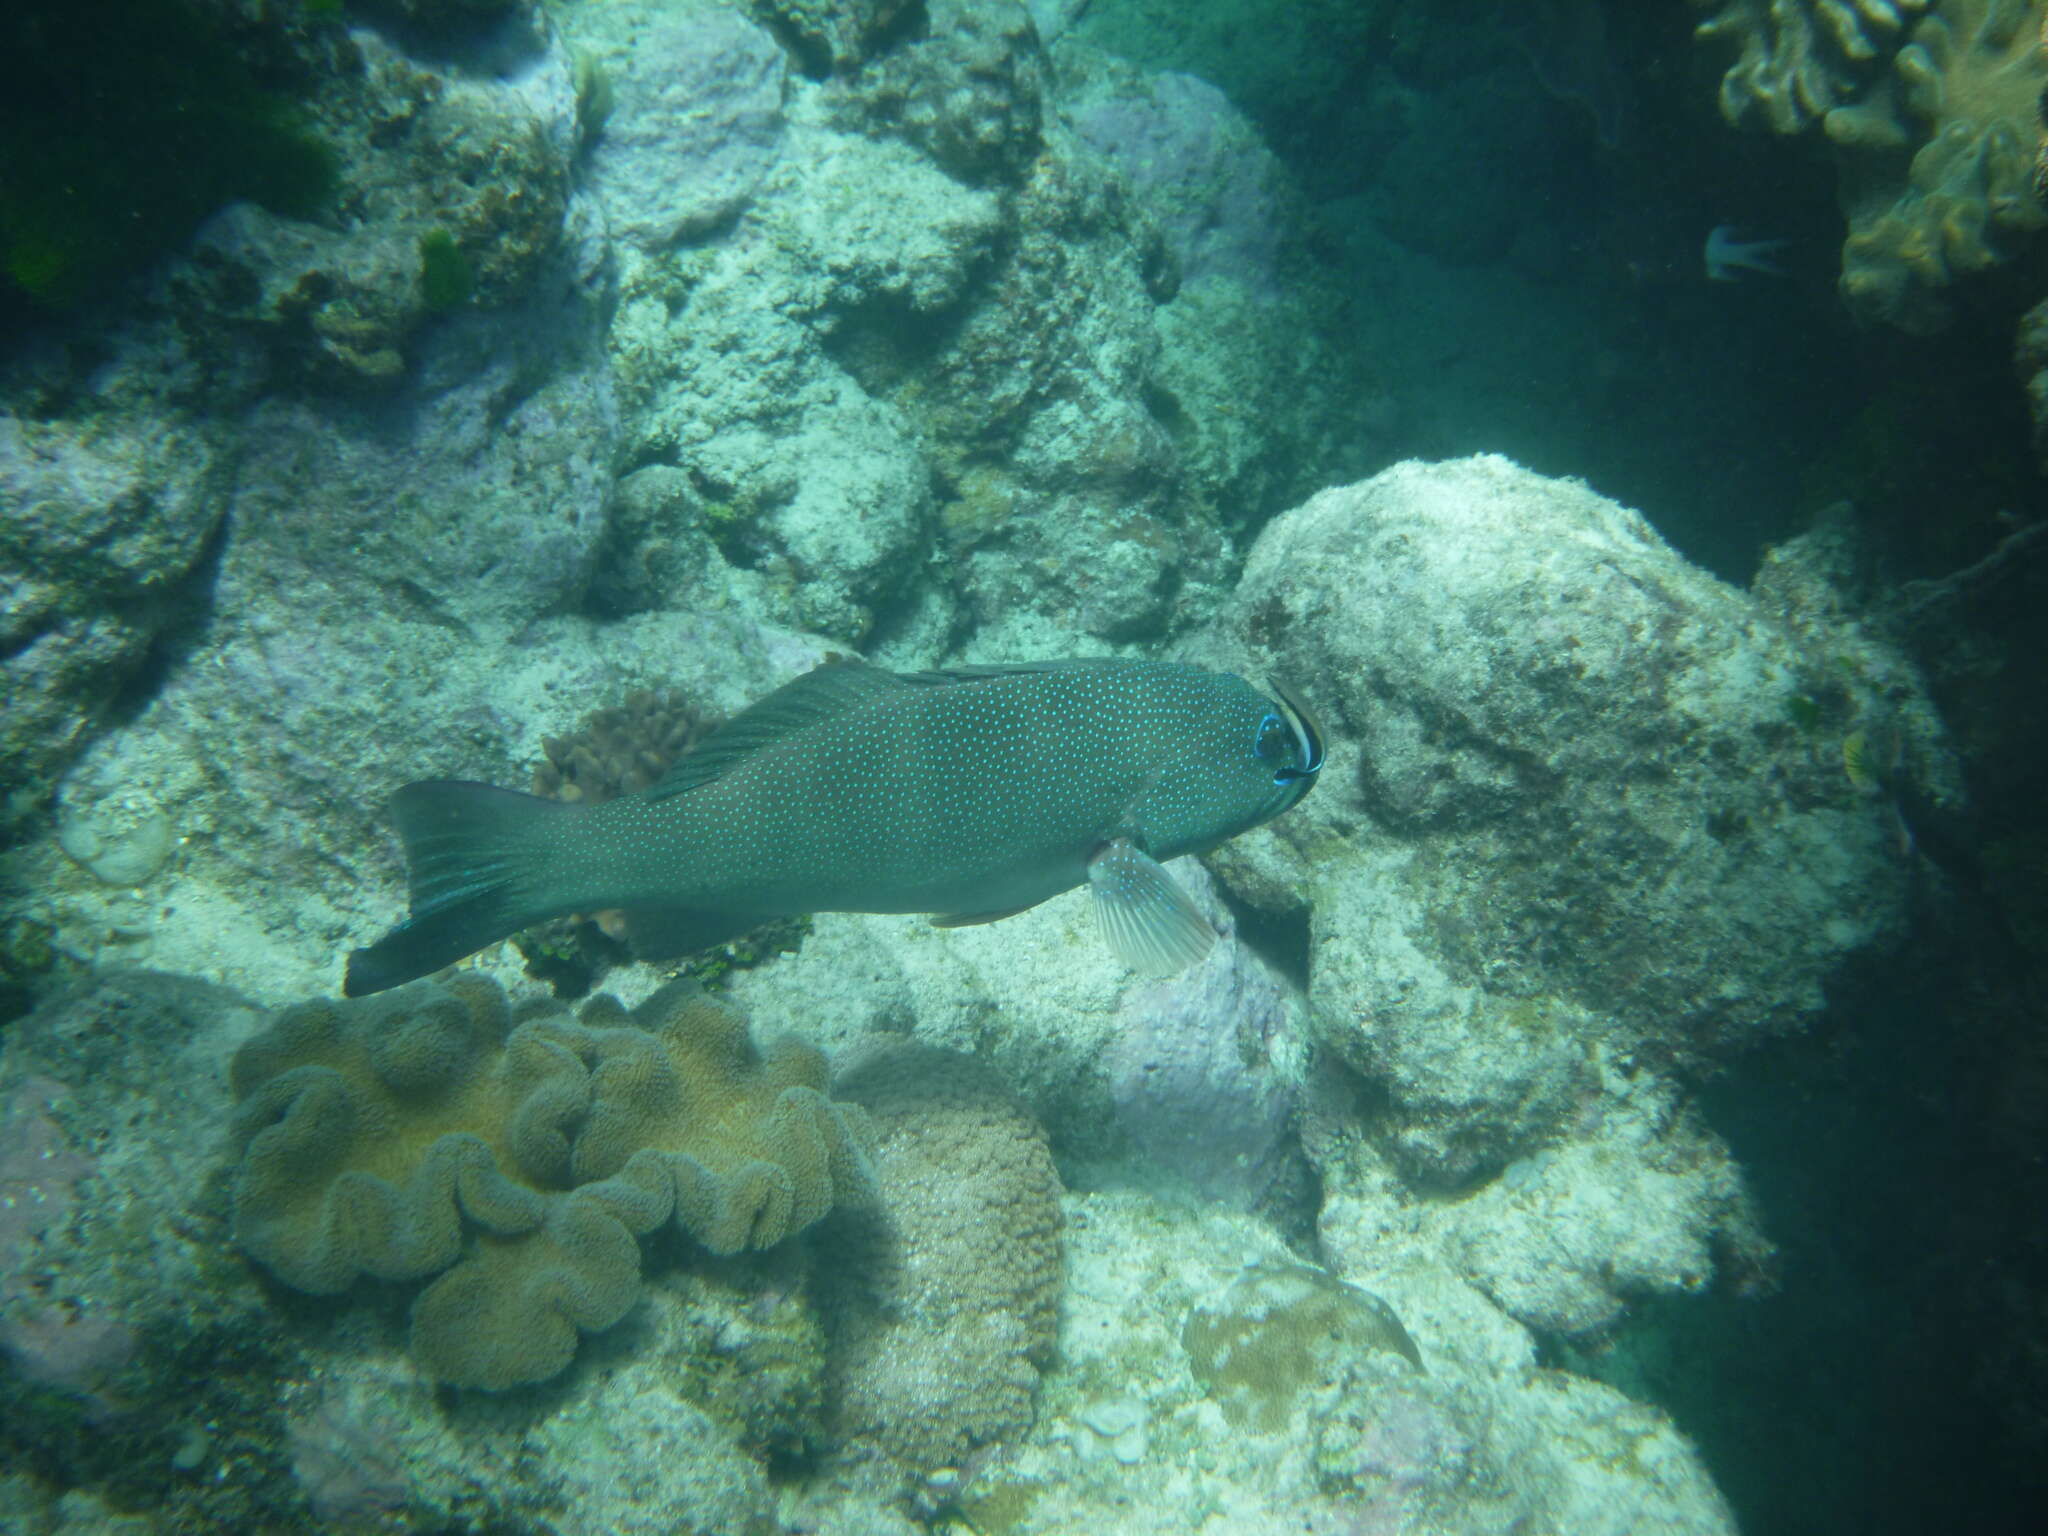 Image of Coral Trout